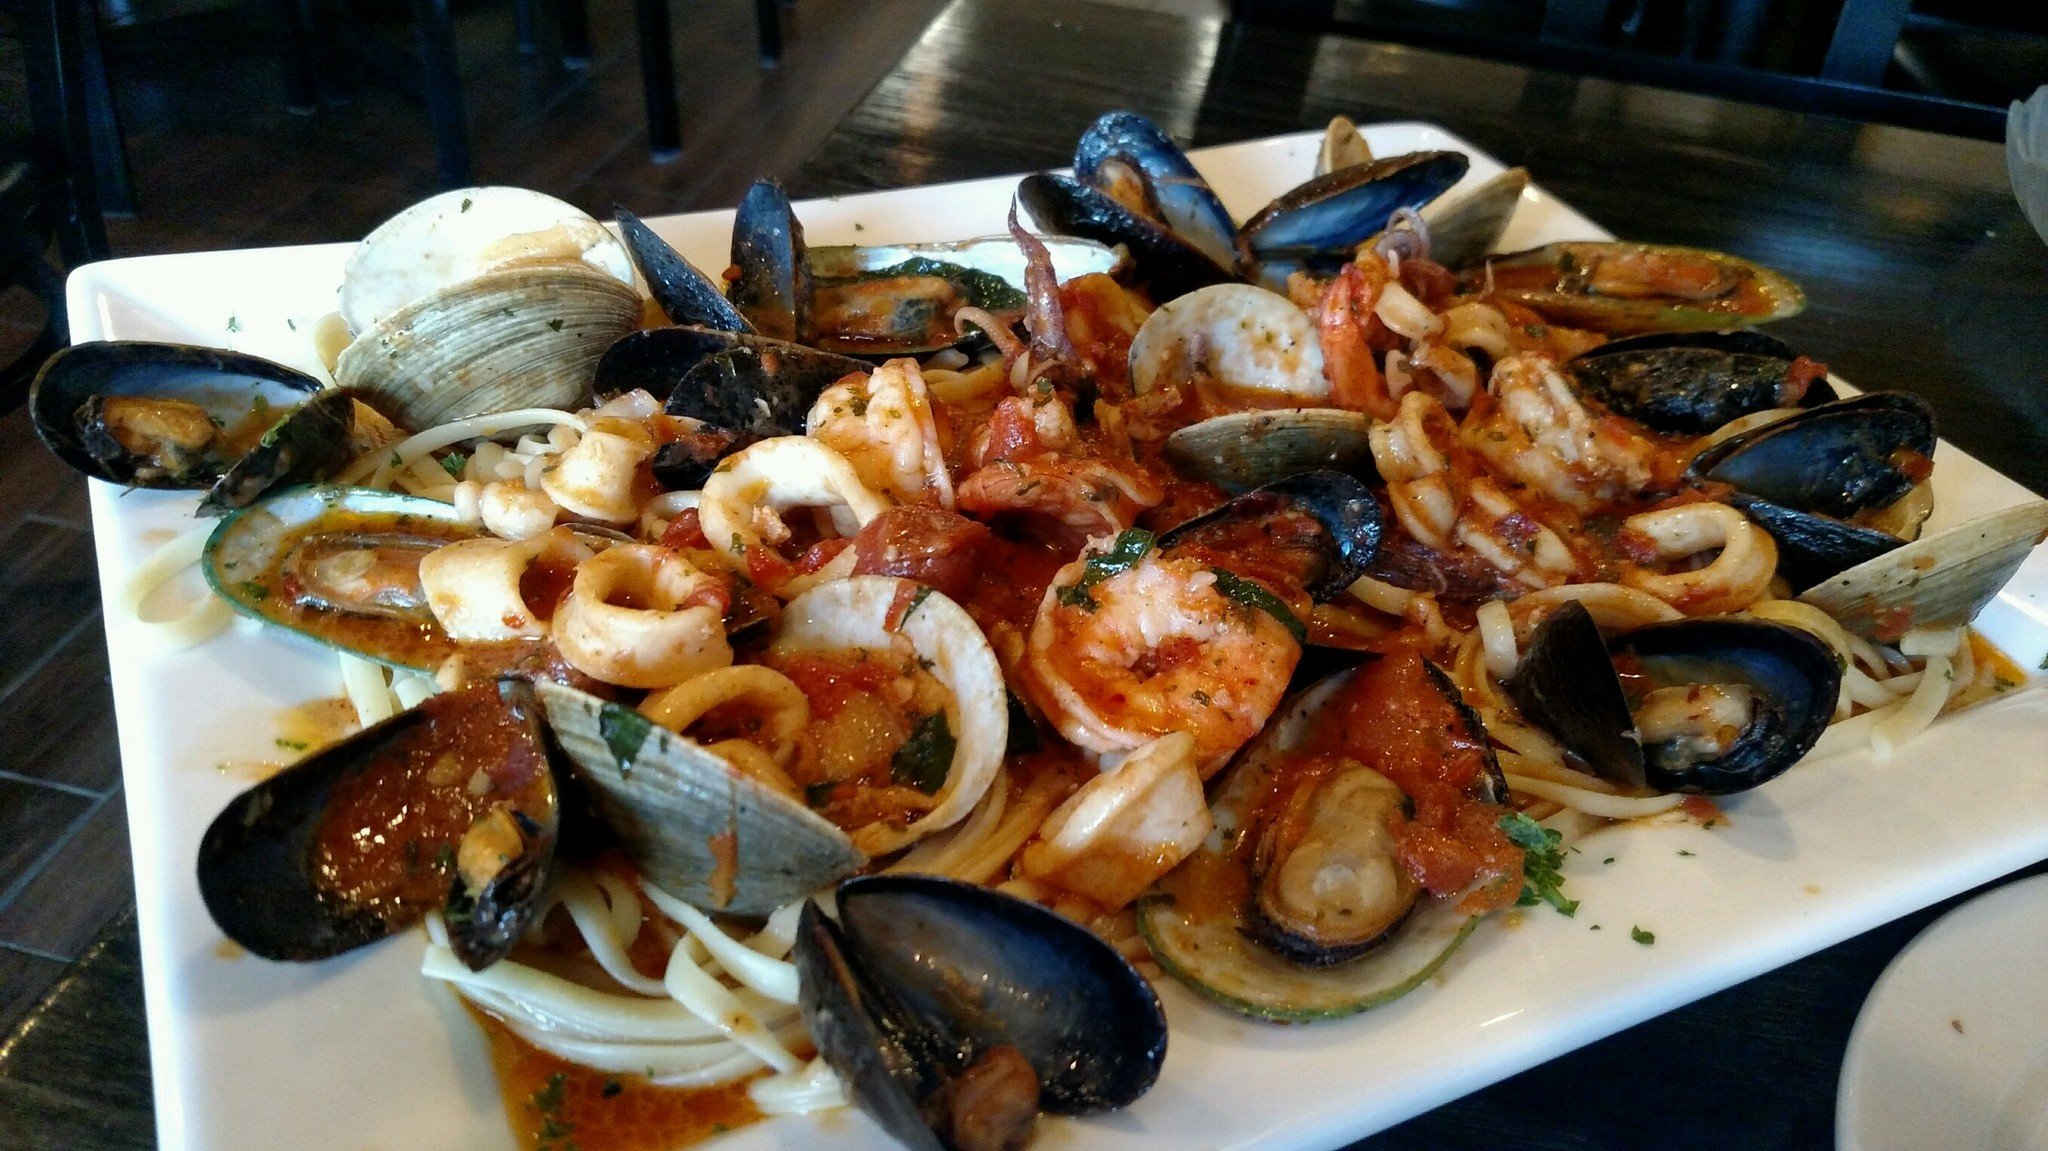 Finding The Best Italian Place In Greensboro